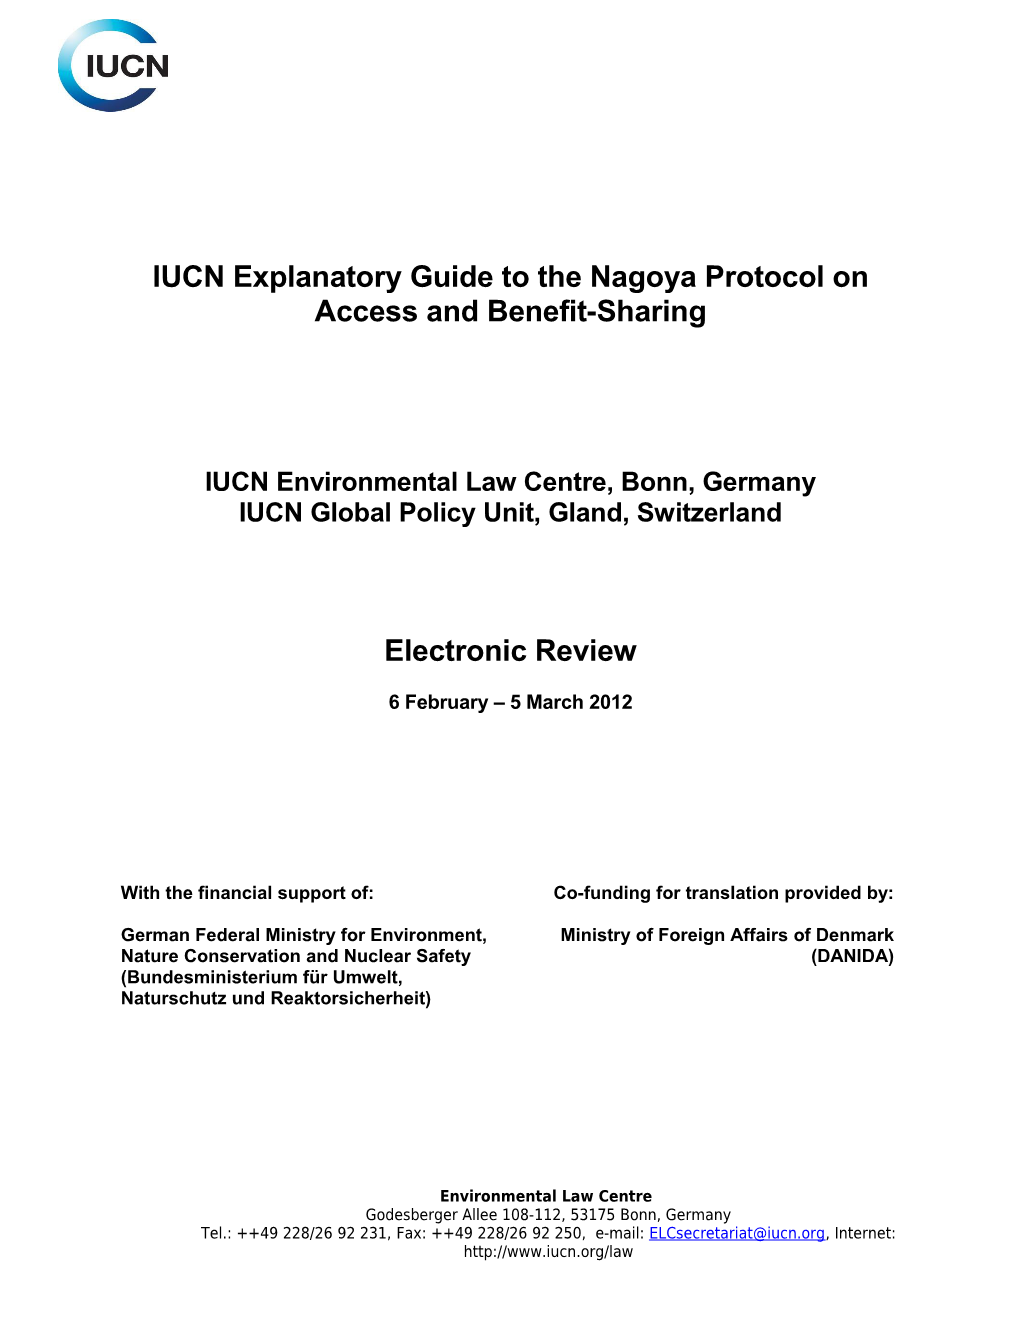 IUCN Explanatory Guide to the Nagoya Protocol on Access and Benefit-Sharing